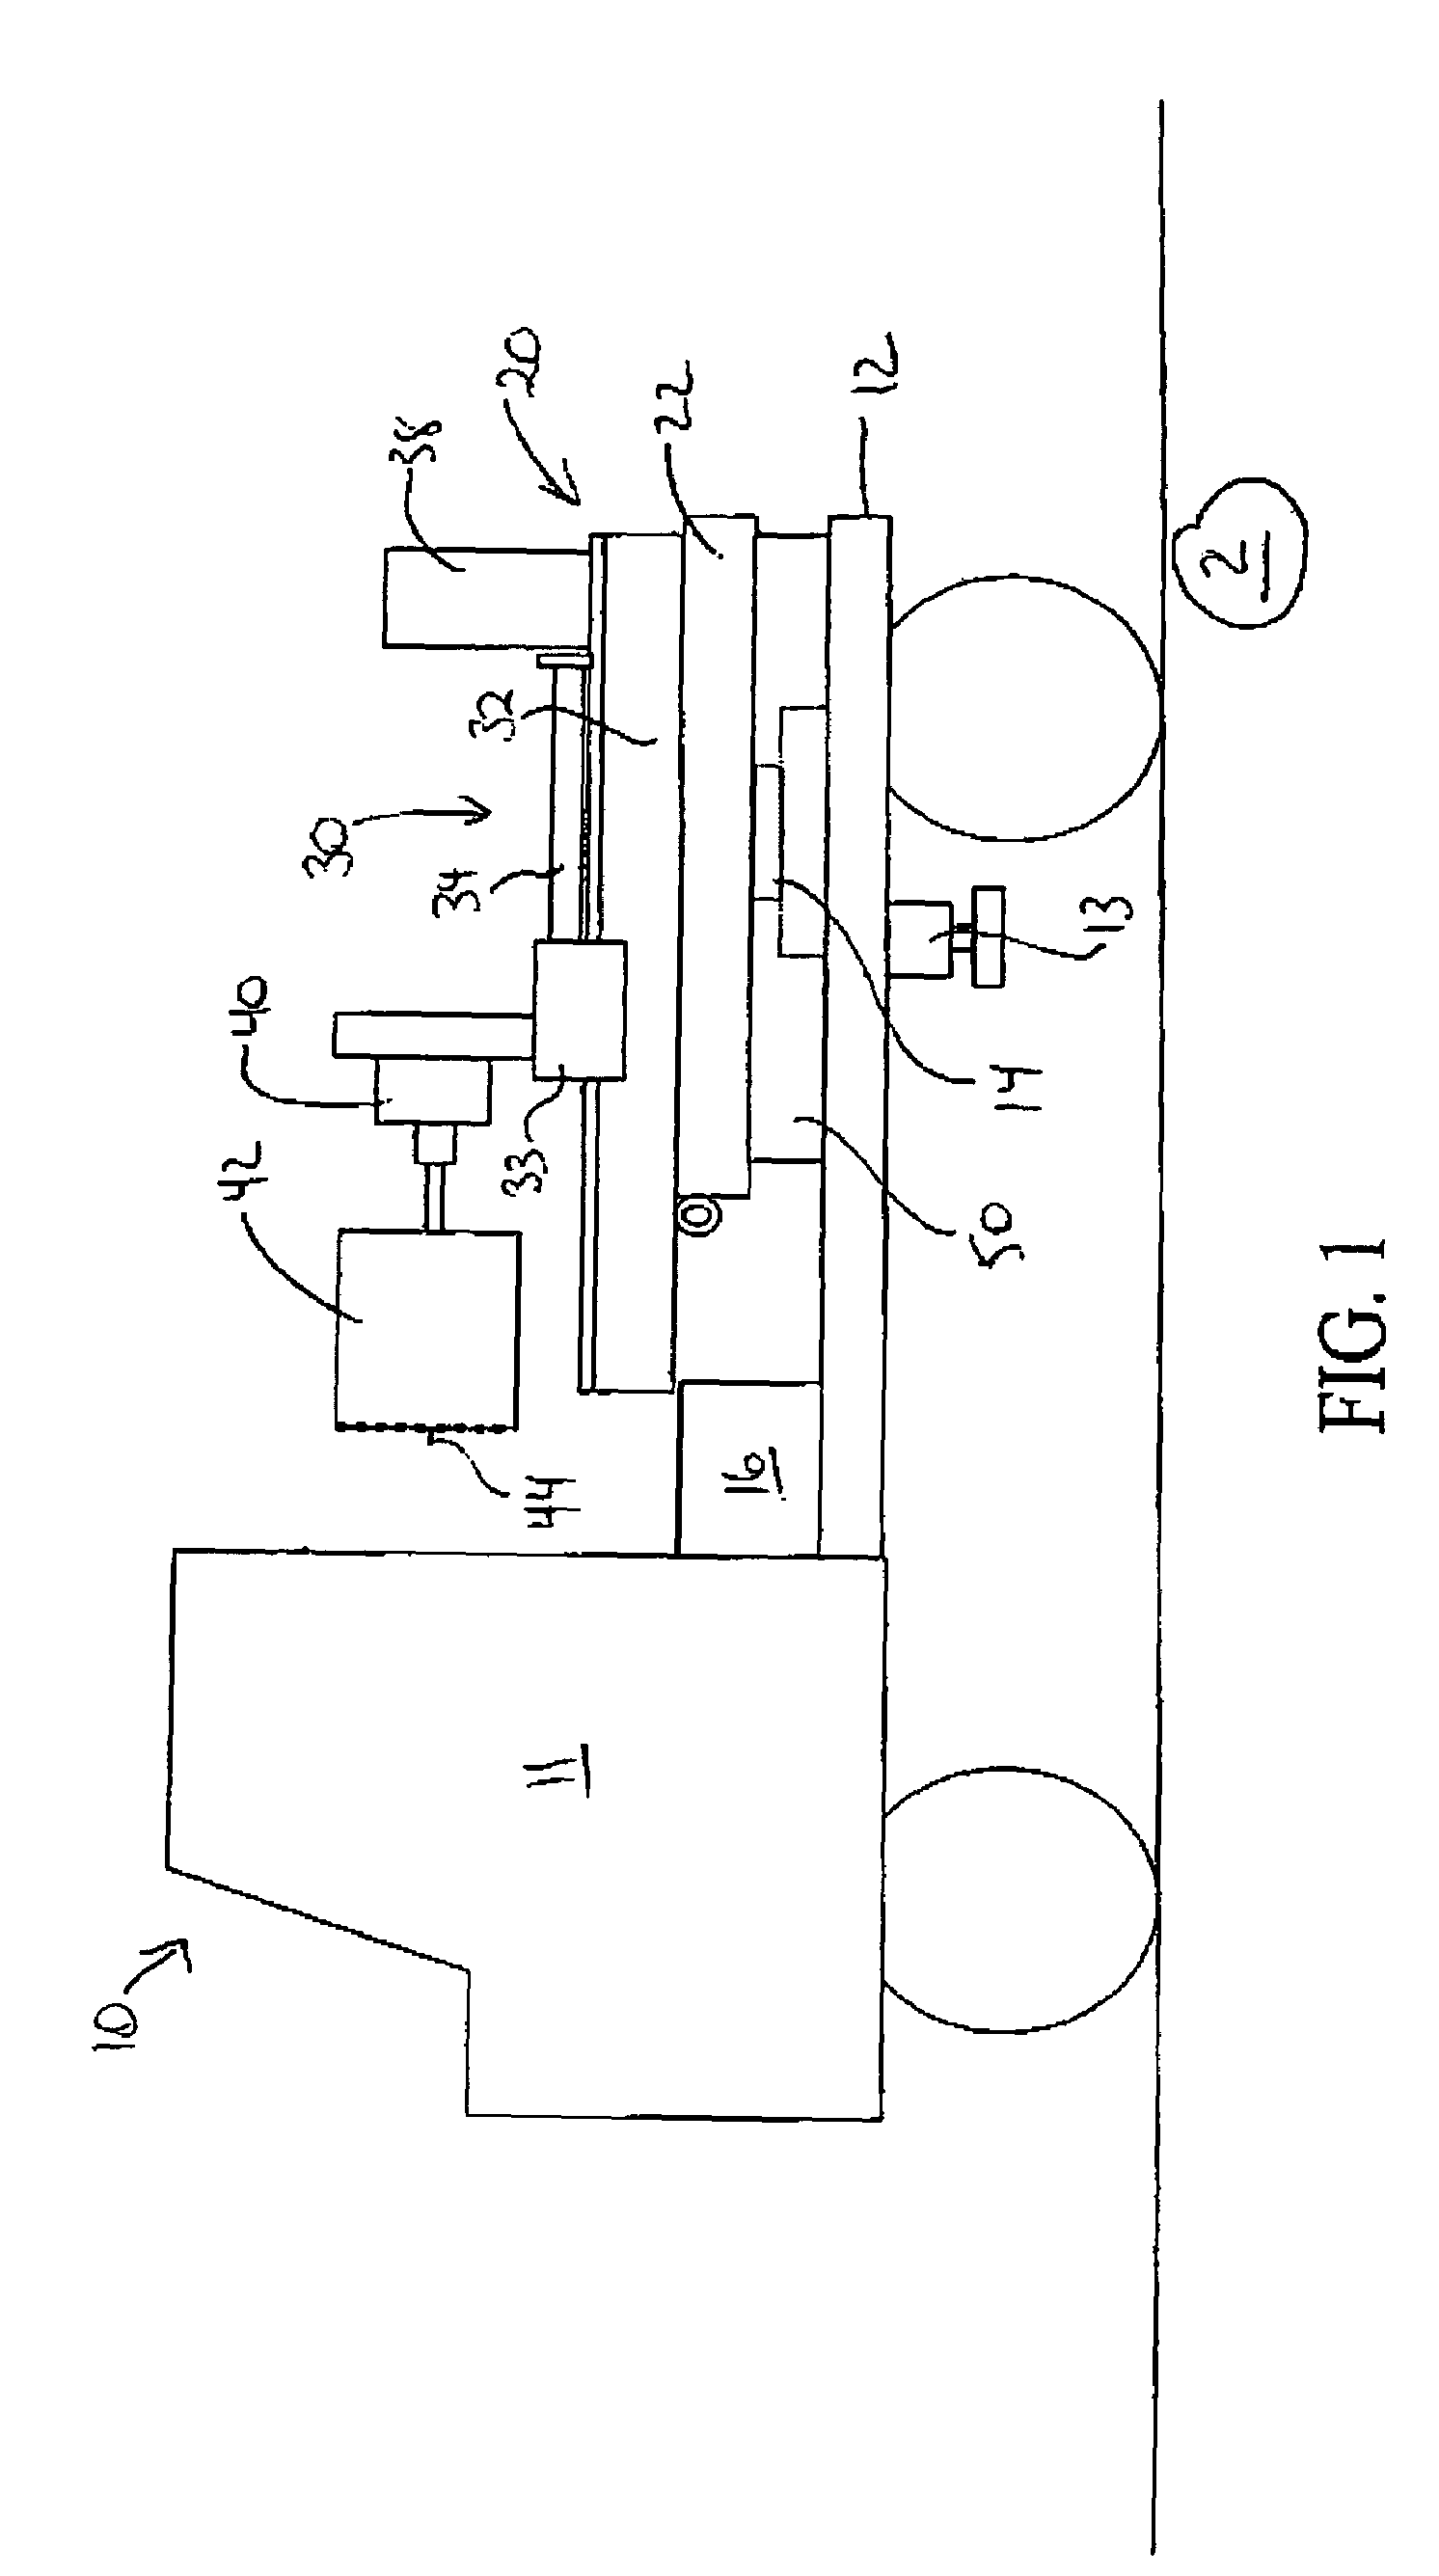 Excavation system and method